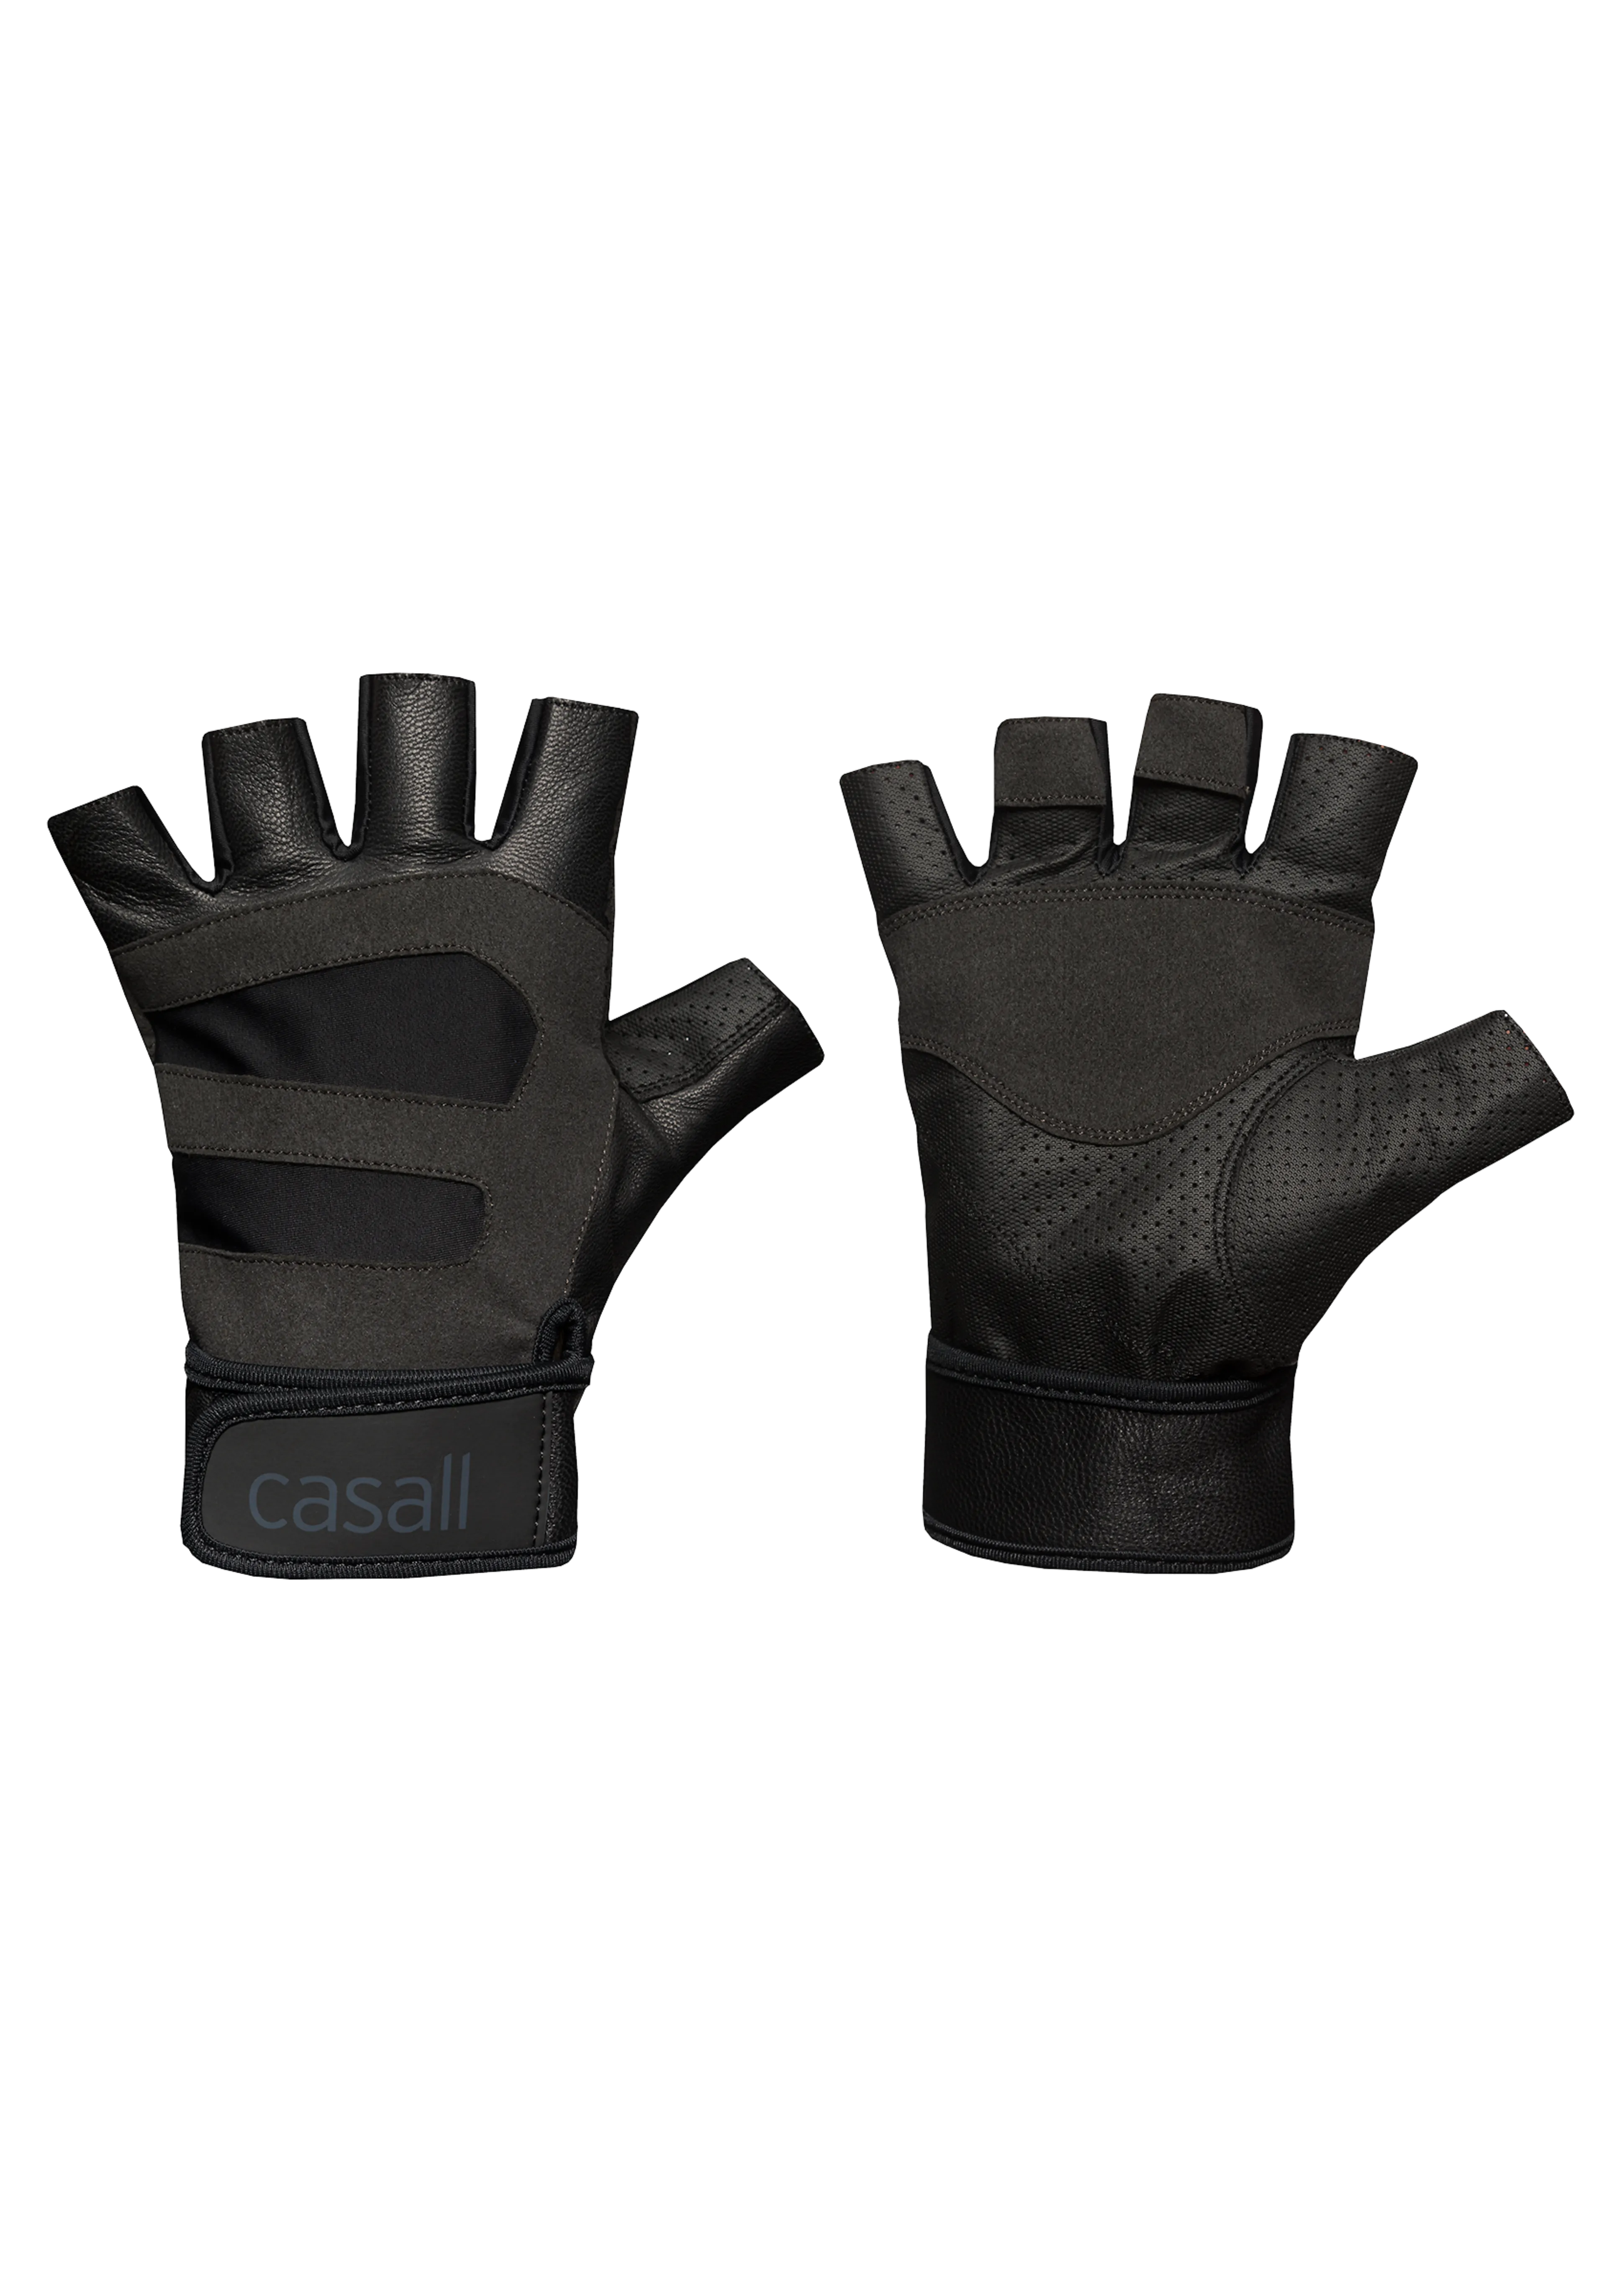 Exercise glove support